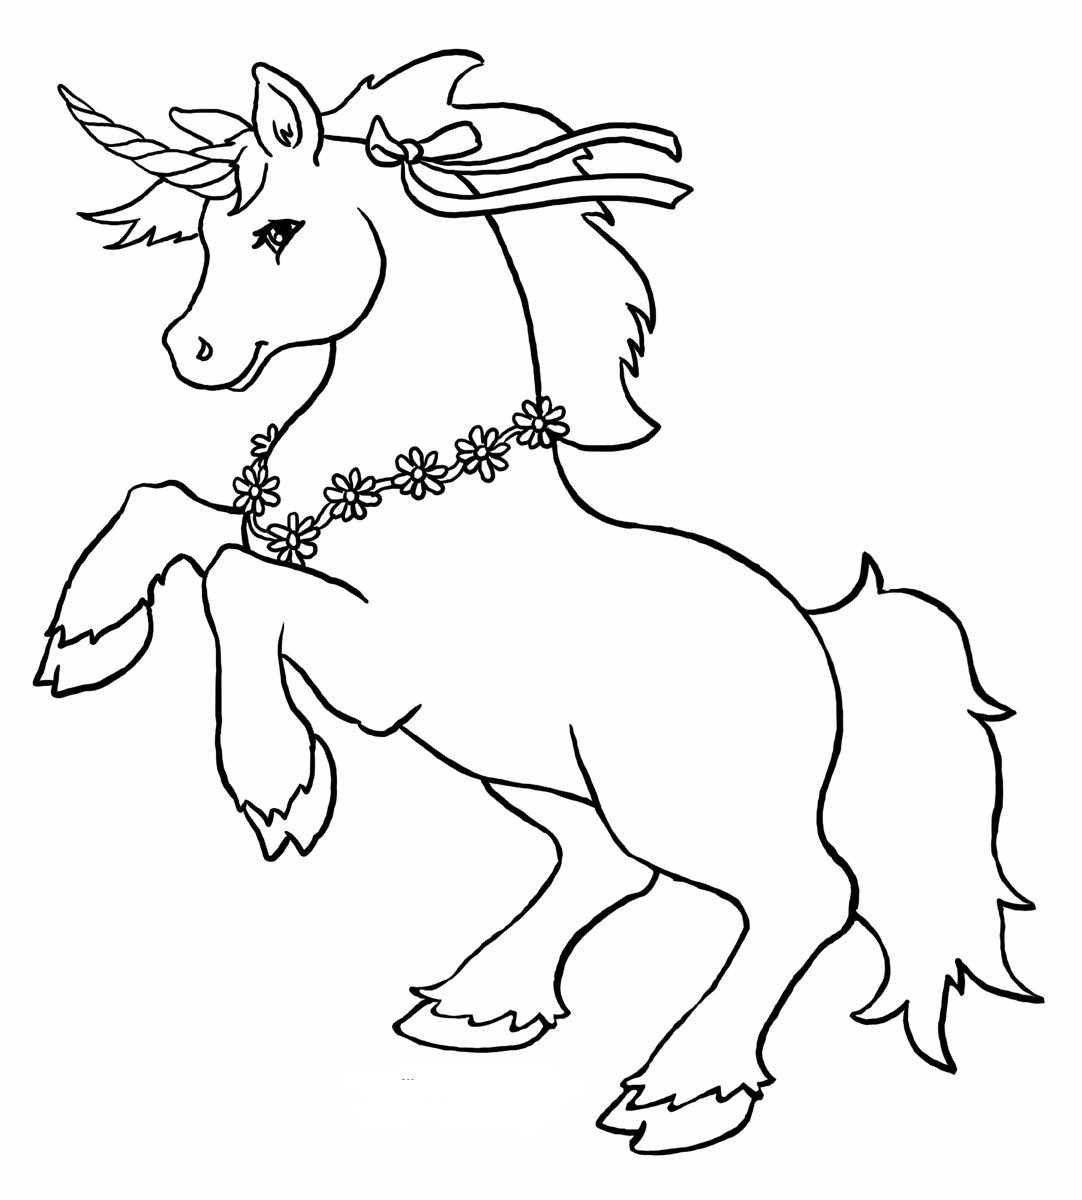 Unicorn With Wreath Coloring Page